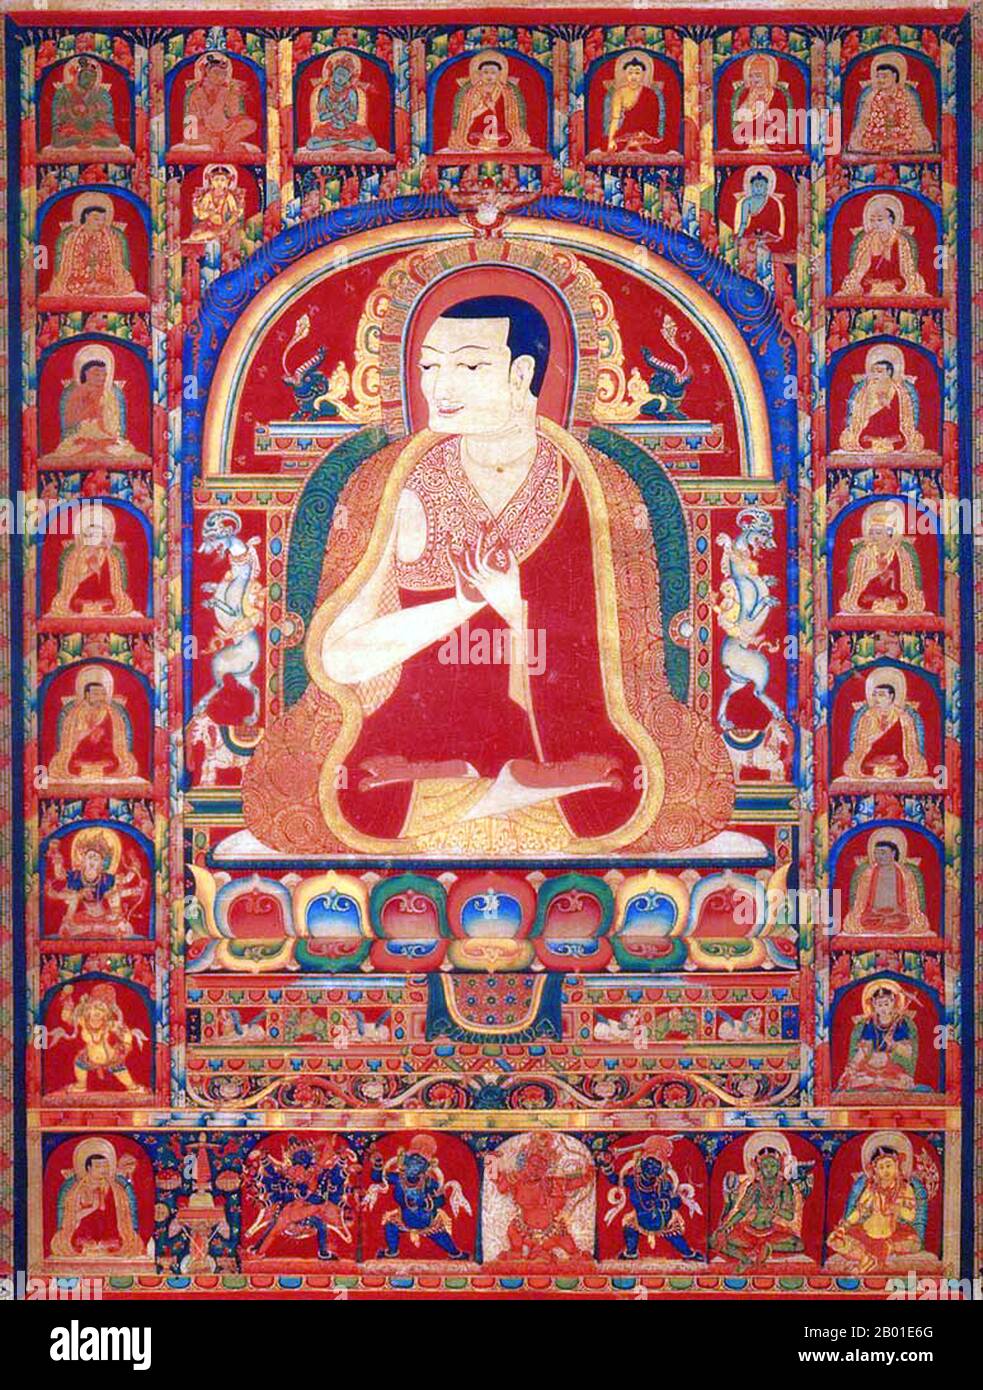 China/Tibet: Thangka of Onpo Lama Rimpoche, 13th century.  Onpo Lama Rimpoche was the fourth abbot of Taklung Gompa (Taklung stag-lung, Taklung Yarthang Monastery, Pel Taklug Tang), a Kagyu Buddhist monastery about 120 km north of Lhasa.  The monastery was founded in 1180 (or 1178) CE by Taklung Thangpa Tashi Pal (1142-1210), on a site previously inhabited by a famous Kadampa lama, Potawa, who was a disciple of Dromton (1005-1064), Atisha's chief disciple. It is the main seat of the Taklung Kagyu, one of the four chief schools of the Kagyu sect. Stock Photo